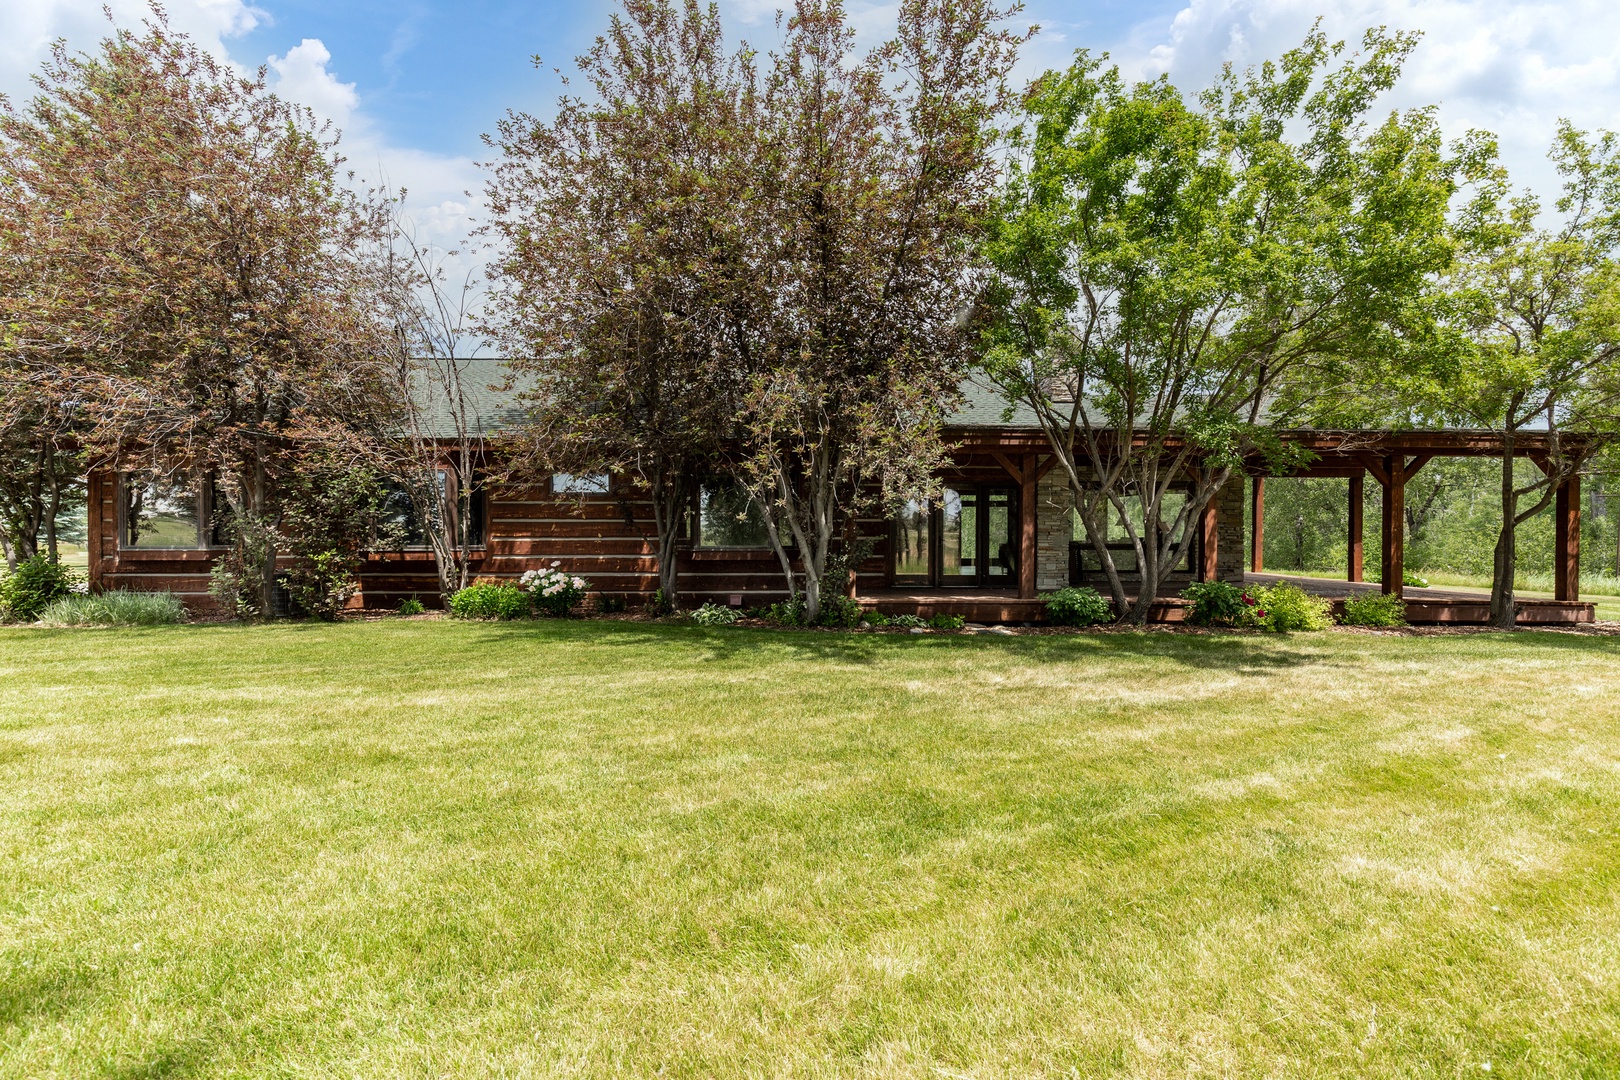 Bozeman Vacation Rentals, The Woodland Oasis - lush greenery, babbling creeks, and wildlife that a truly unique experience